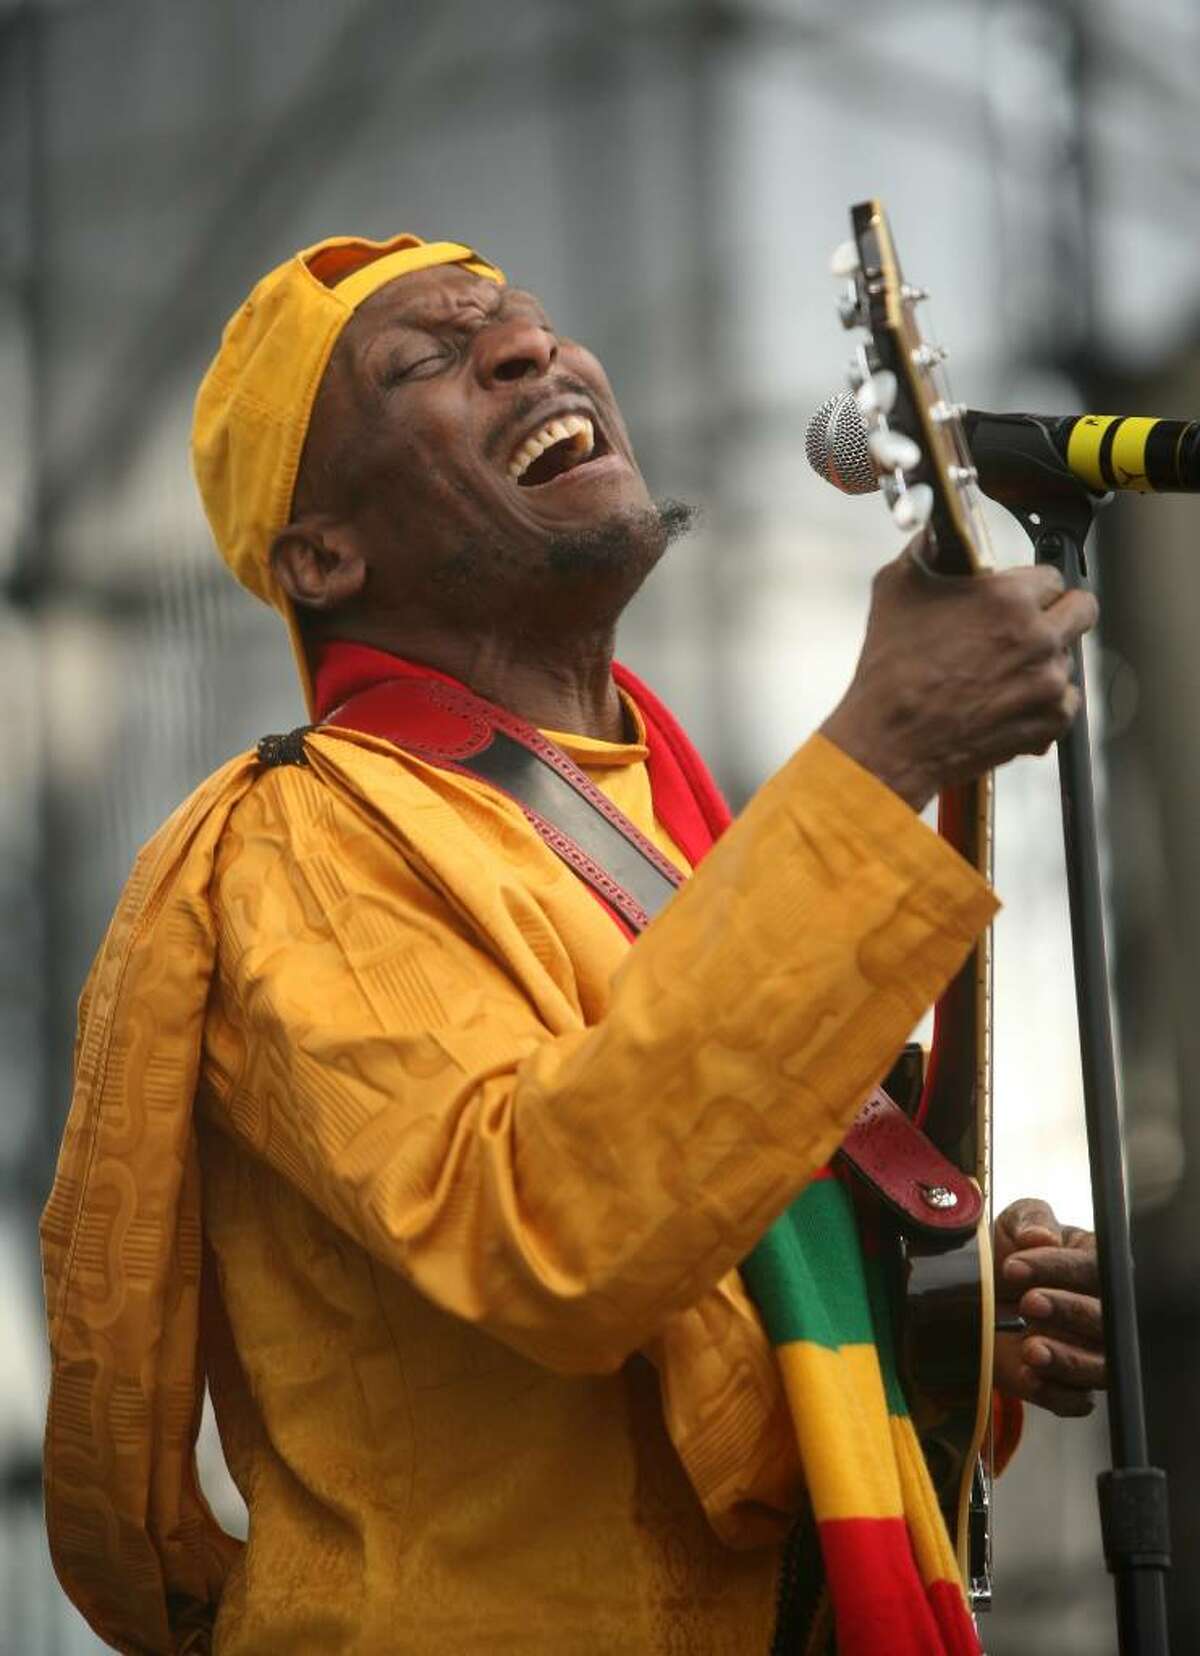 Reggae star Jimmy Cliff performs on the main stage at the Gathering of the Vibes music festival in Bridgeport on Sunday, August 1, 2010.